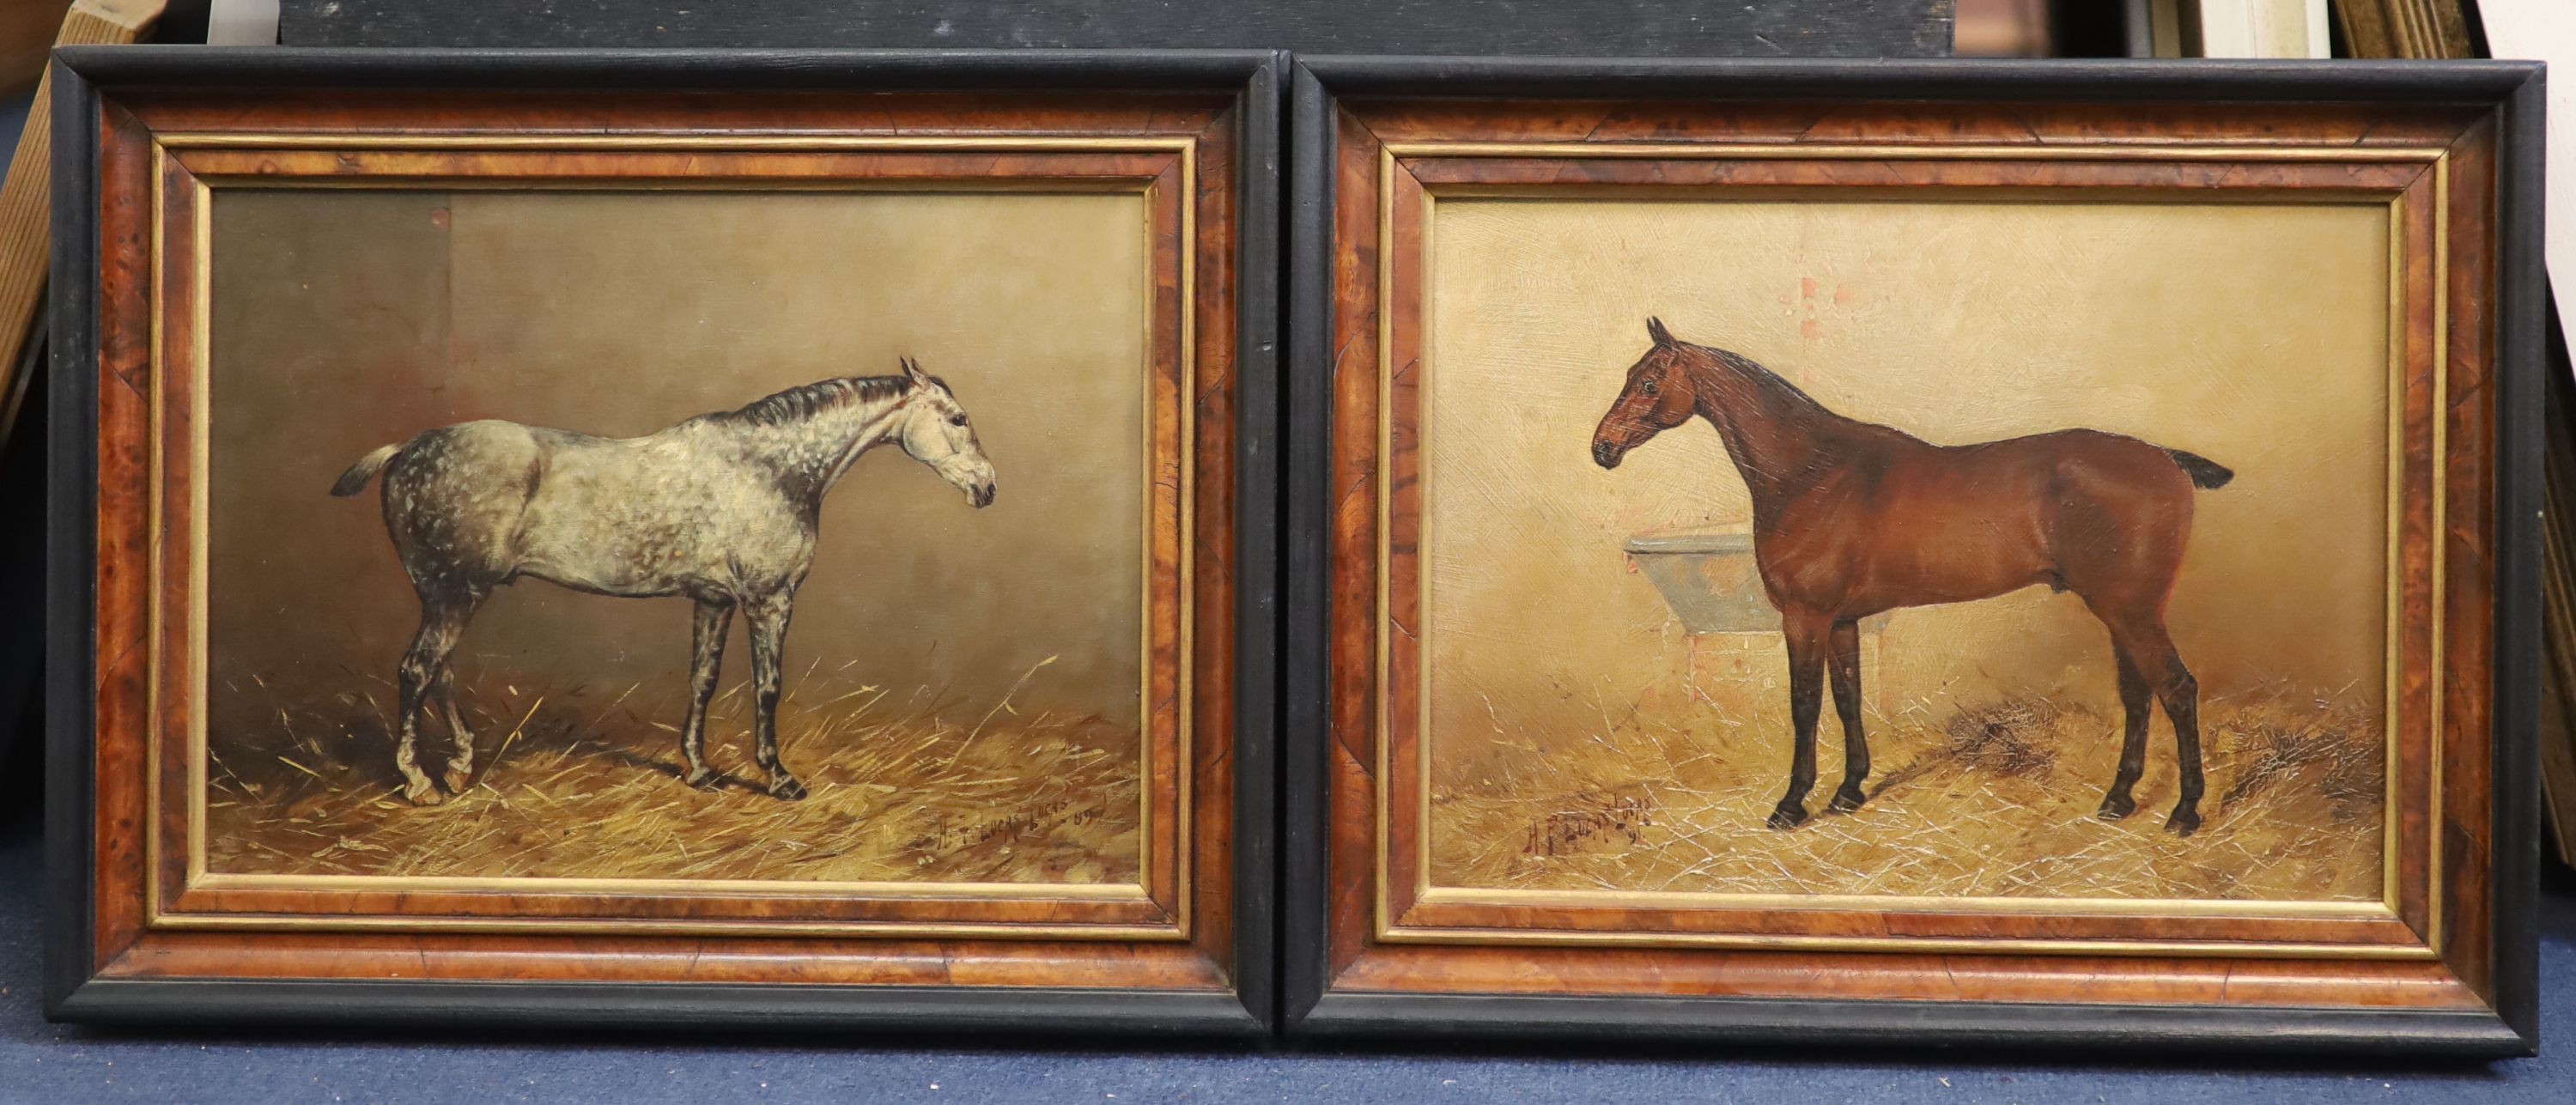 Henry Frederick Lucas-Lucas (1848-1943), Portraits of racehorses in stables, pair of oils on boards, 21 x 29cm